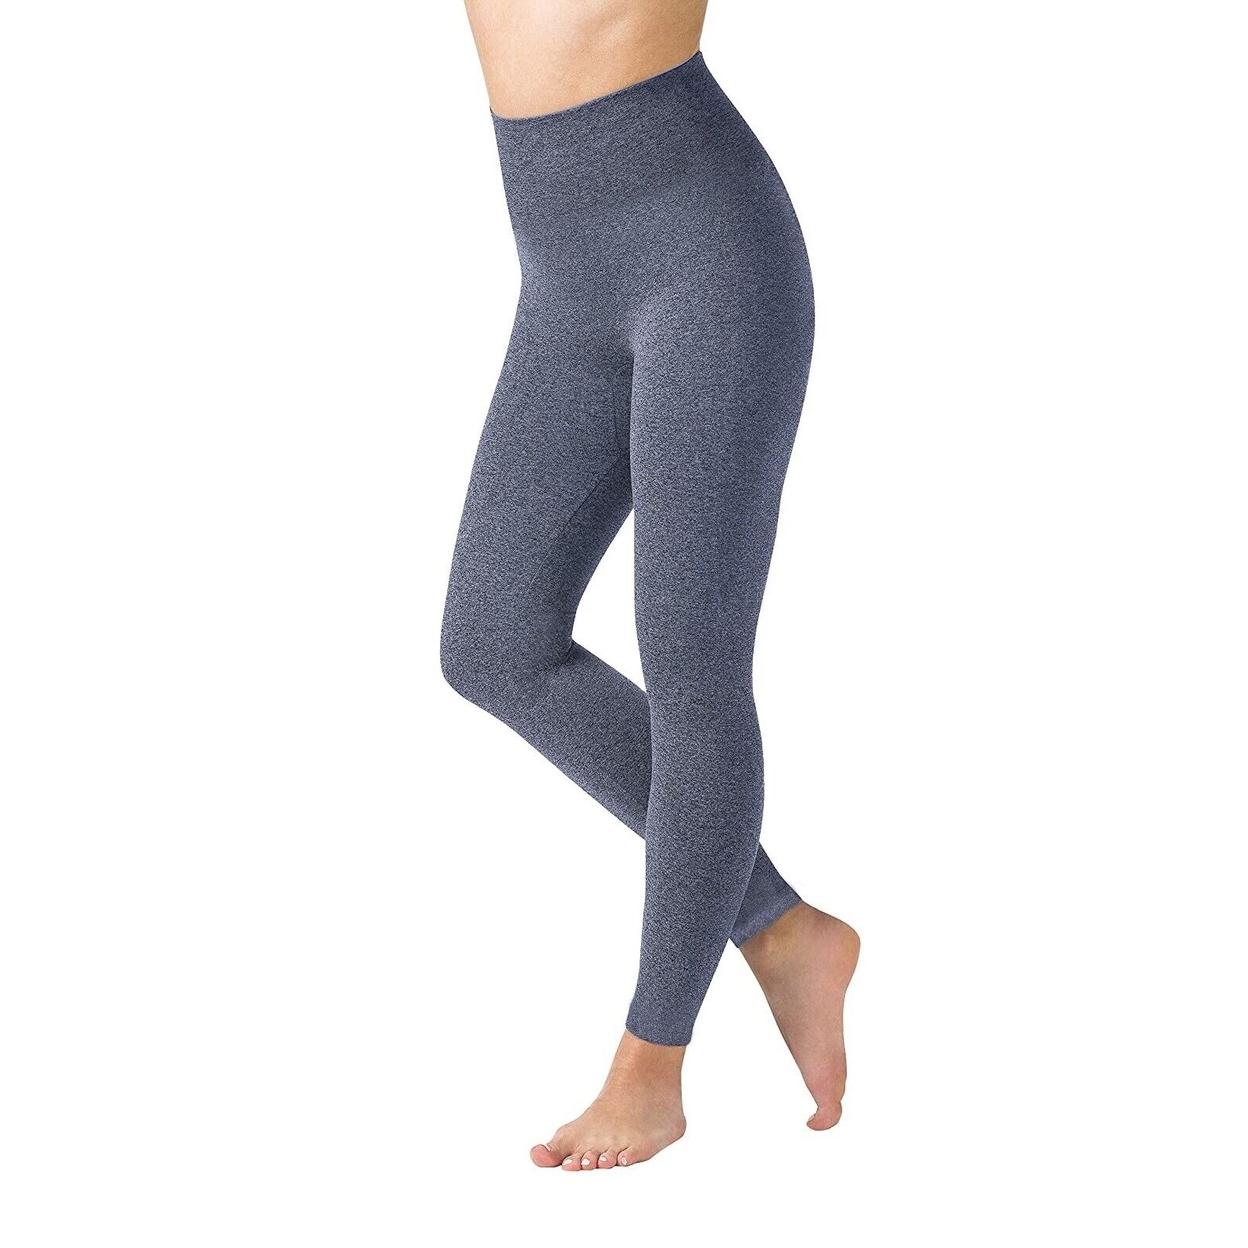 Multi-Packs Women High Waisted Fleece Lined Marled Leggings Ultra Soft Warm Pant - Charcoal/navy, 1, 2x